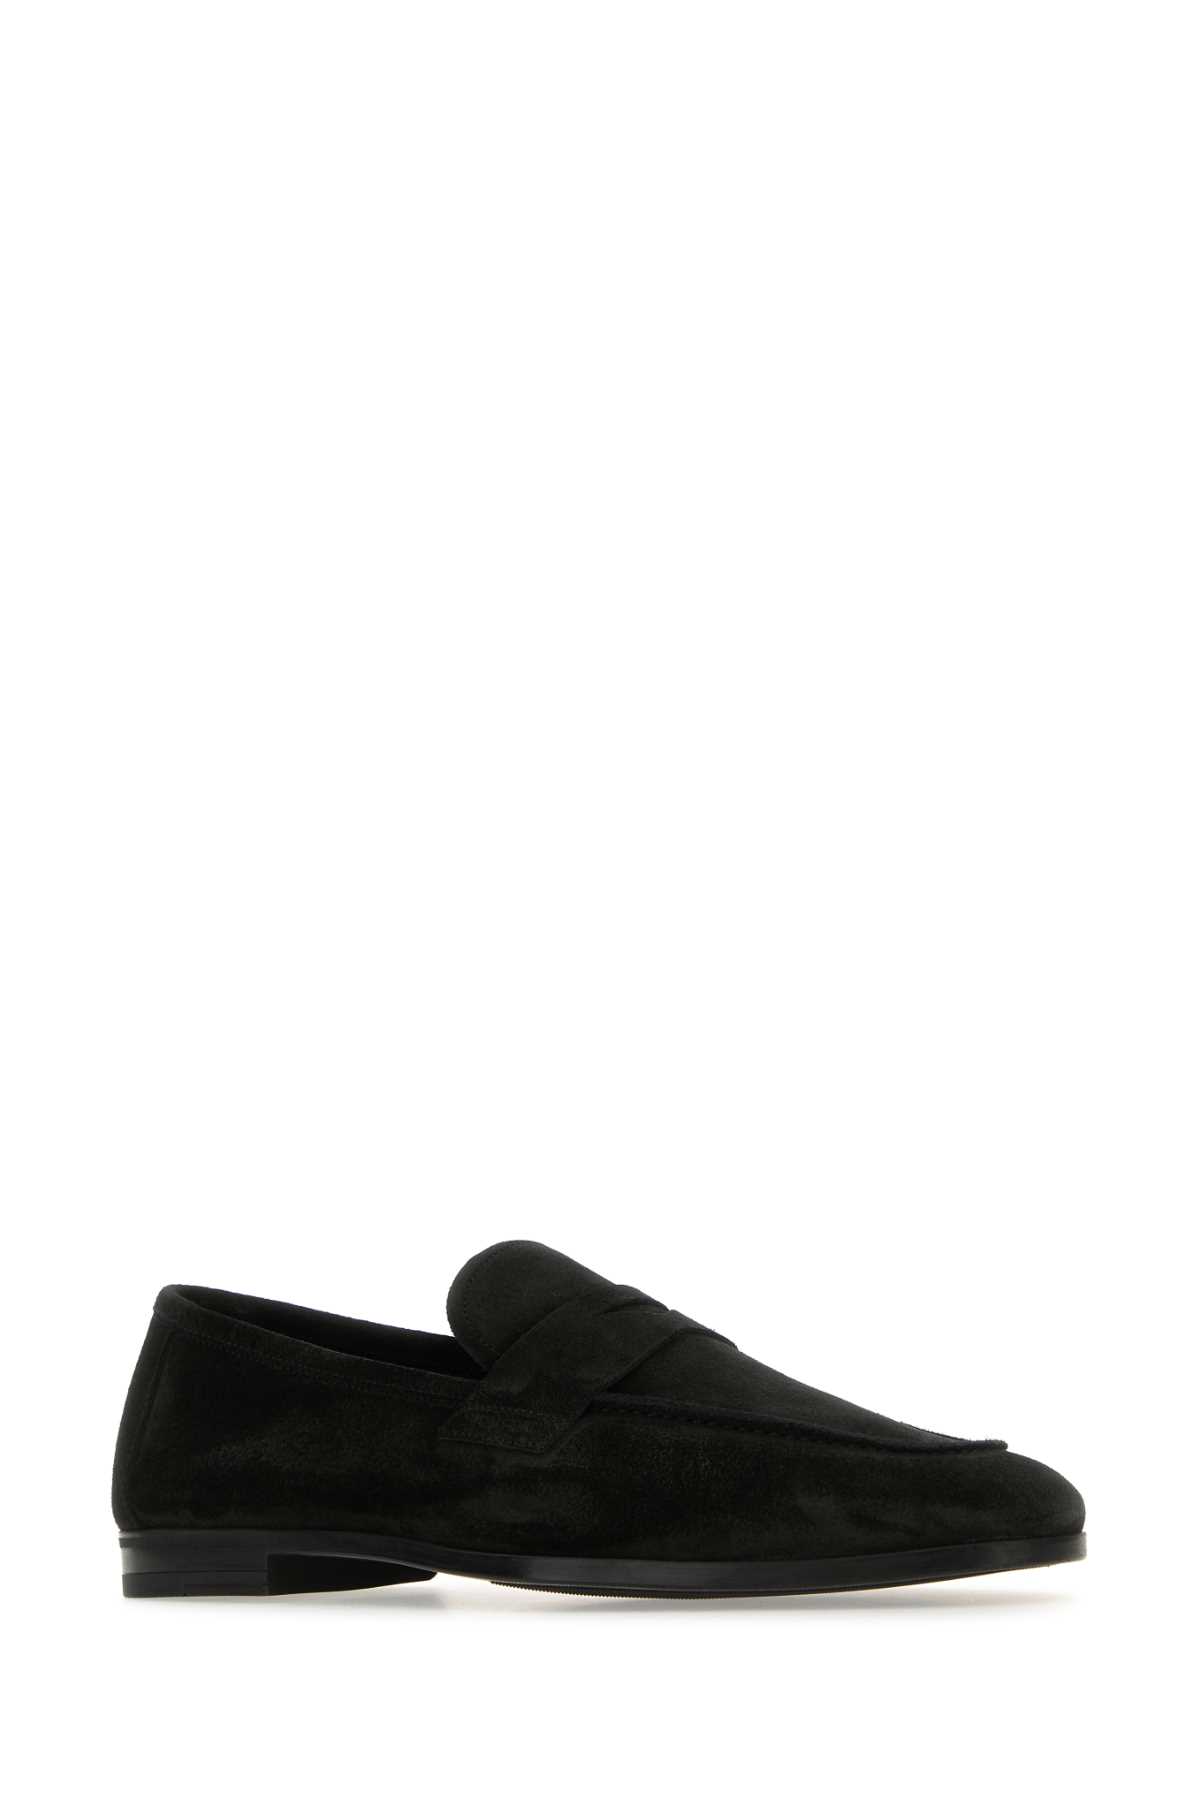 Shop Tom Ford Black Suede Sean Loafers